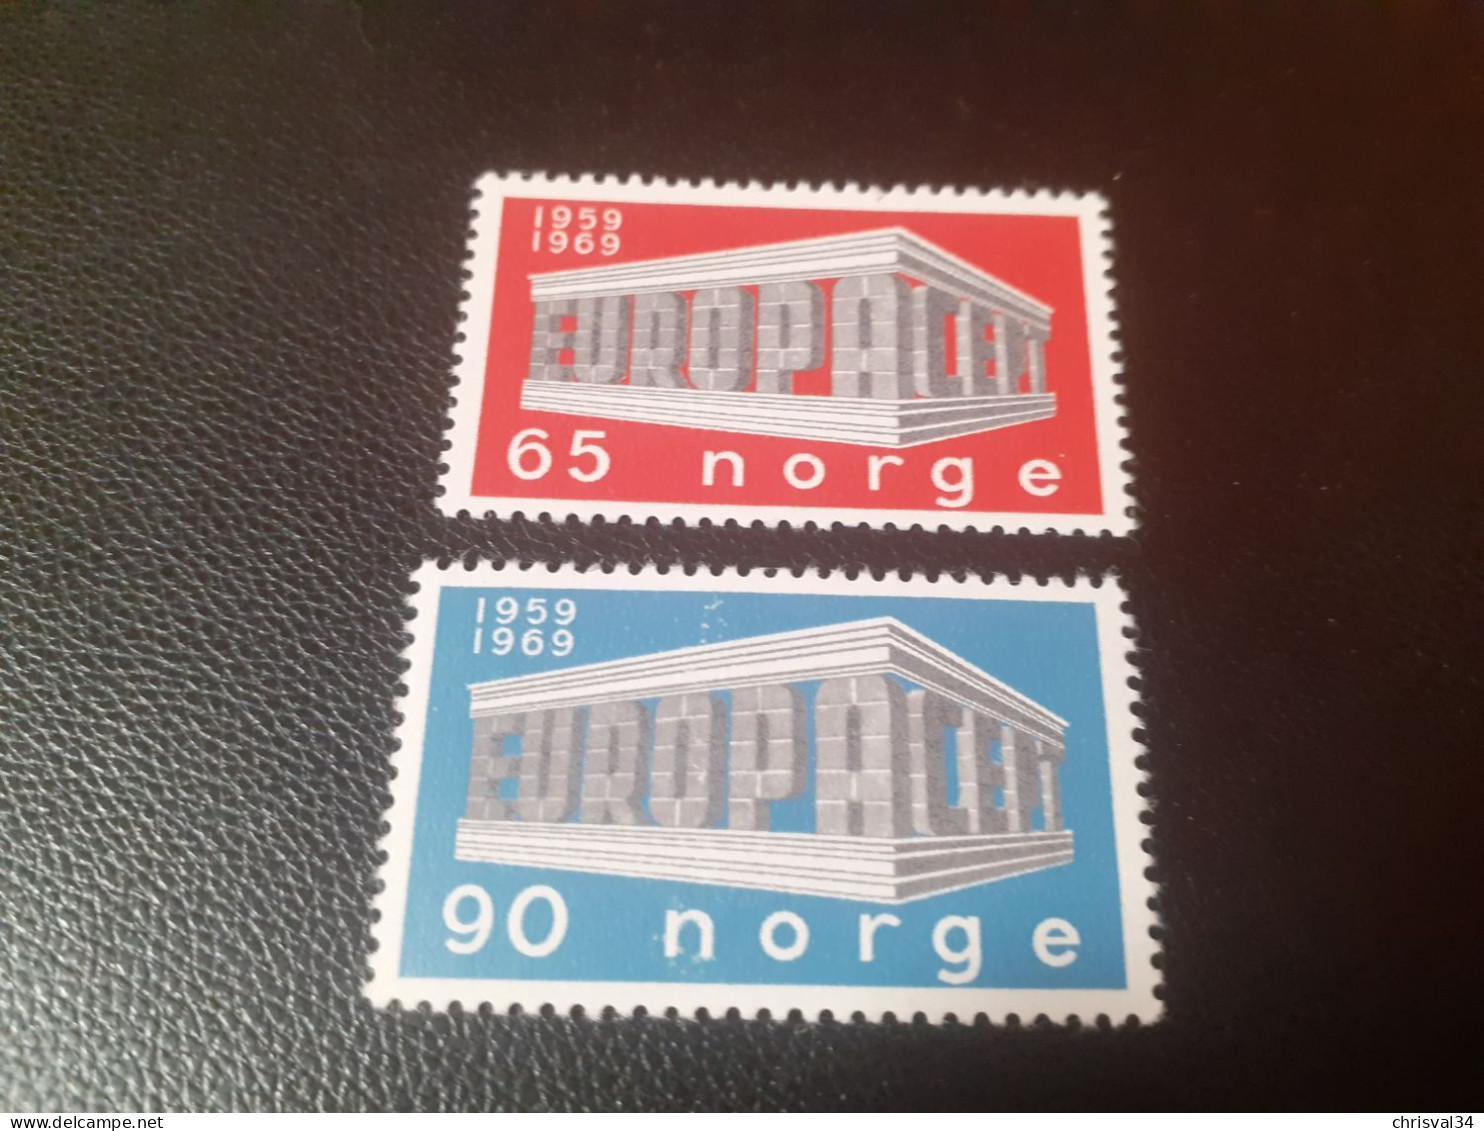 TIMBRES   NORVEGE  ANNEE 1969   N  538 / 539   COTE  3,00  EUROS   NEUFS  LUXE** - Unused Stamps